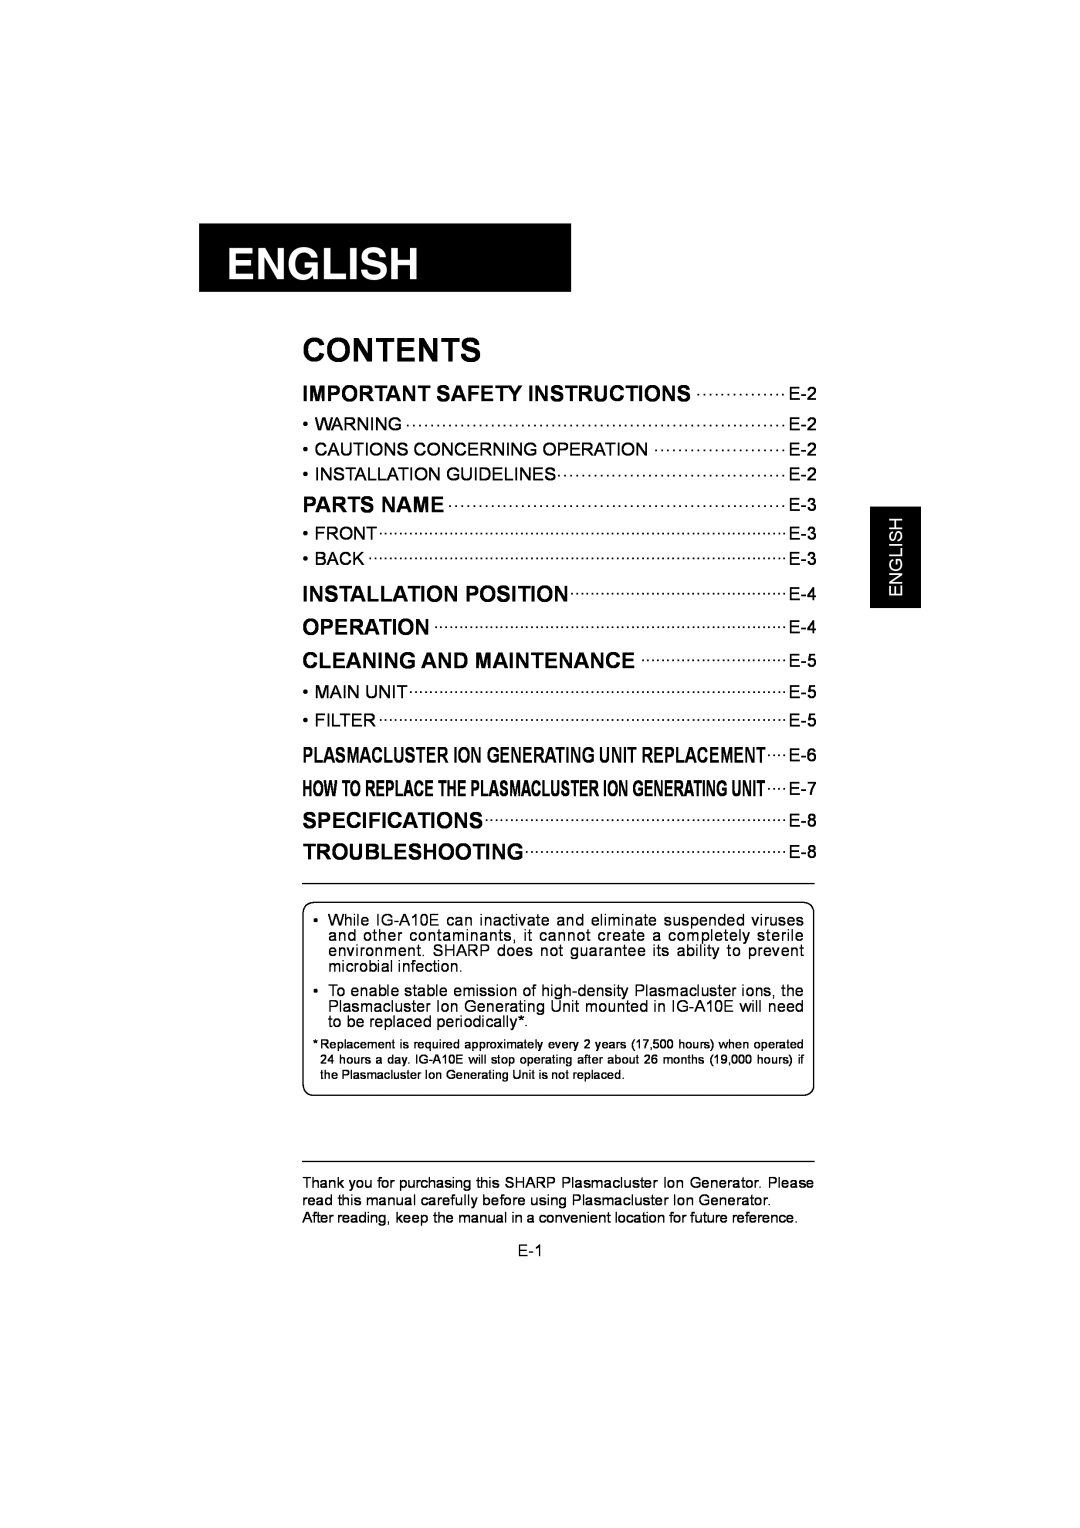 Sharp IG-A10E operation manual English, Contents, IMPORTANT SAFETY INSTRUCTIONS ...............E-2 